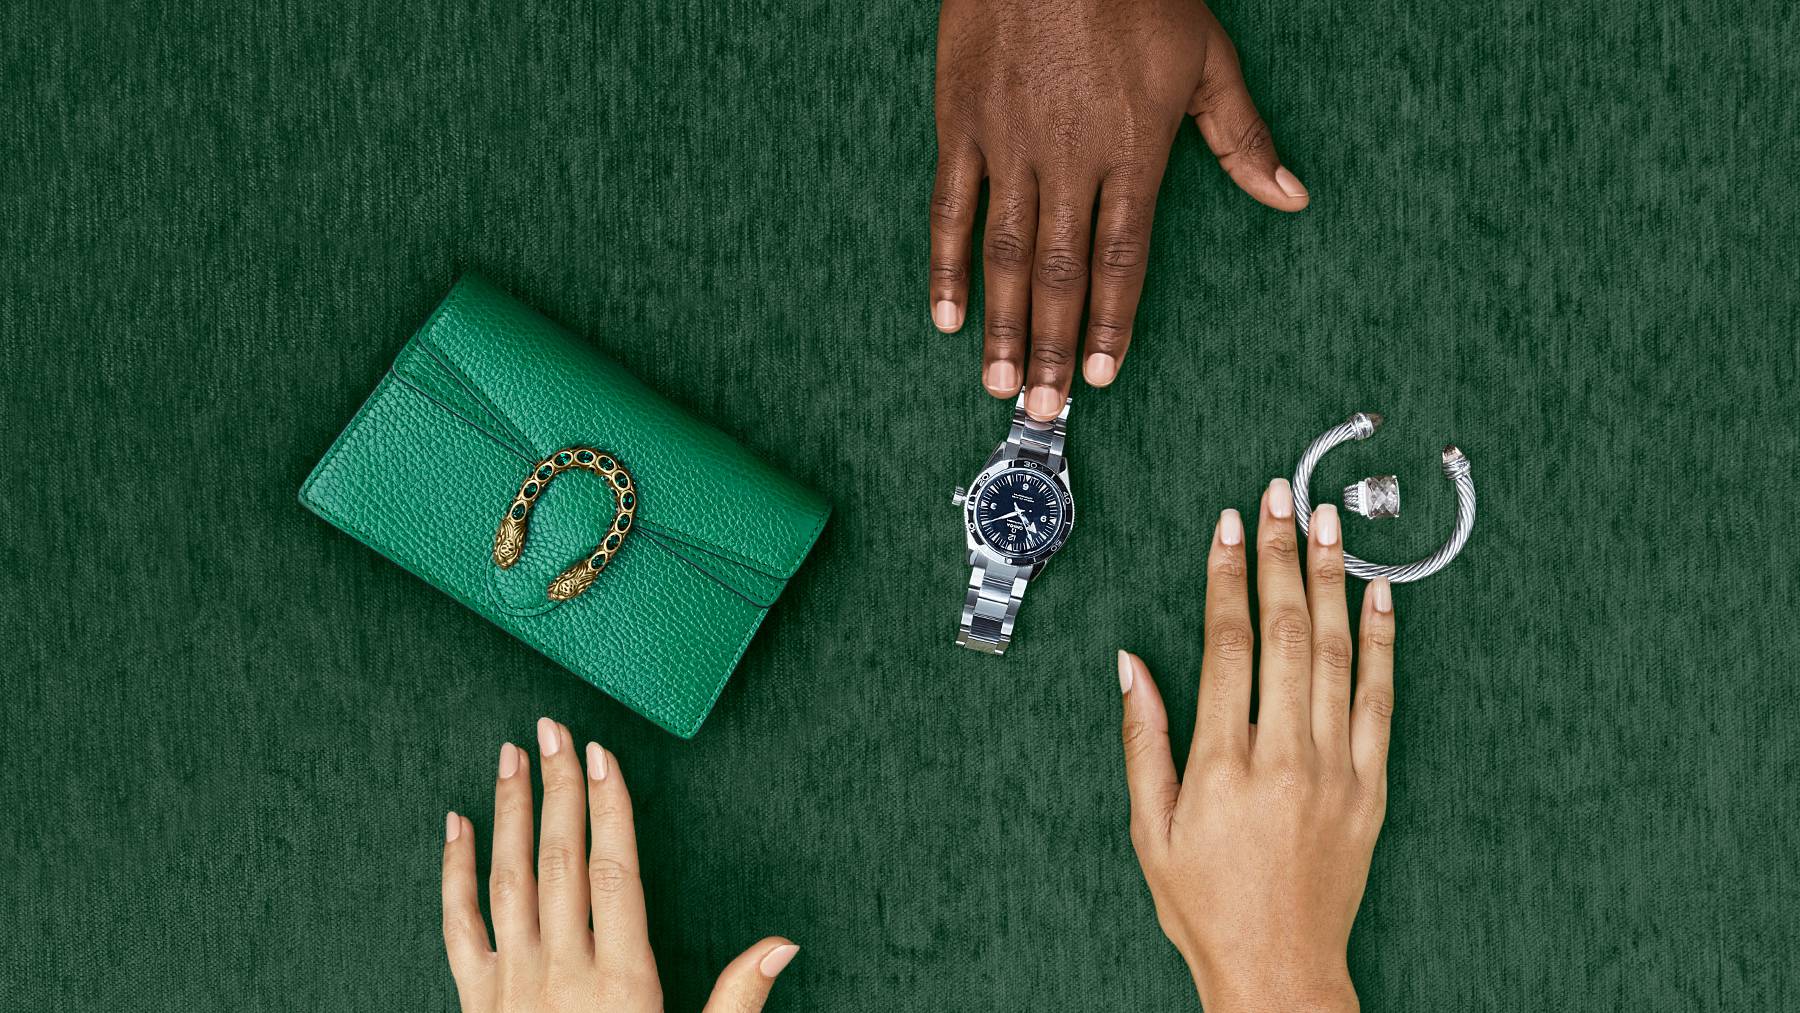 Luxury resale items on a green background including a bag, watch and jewellery.